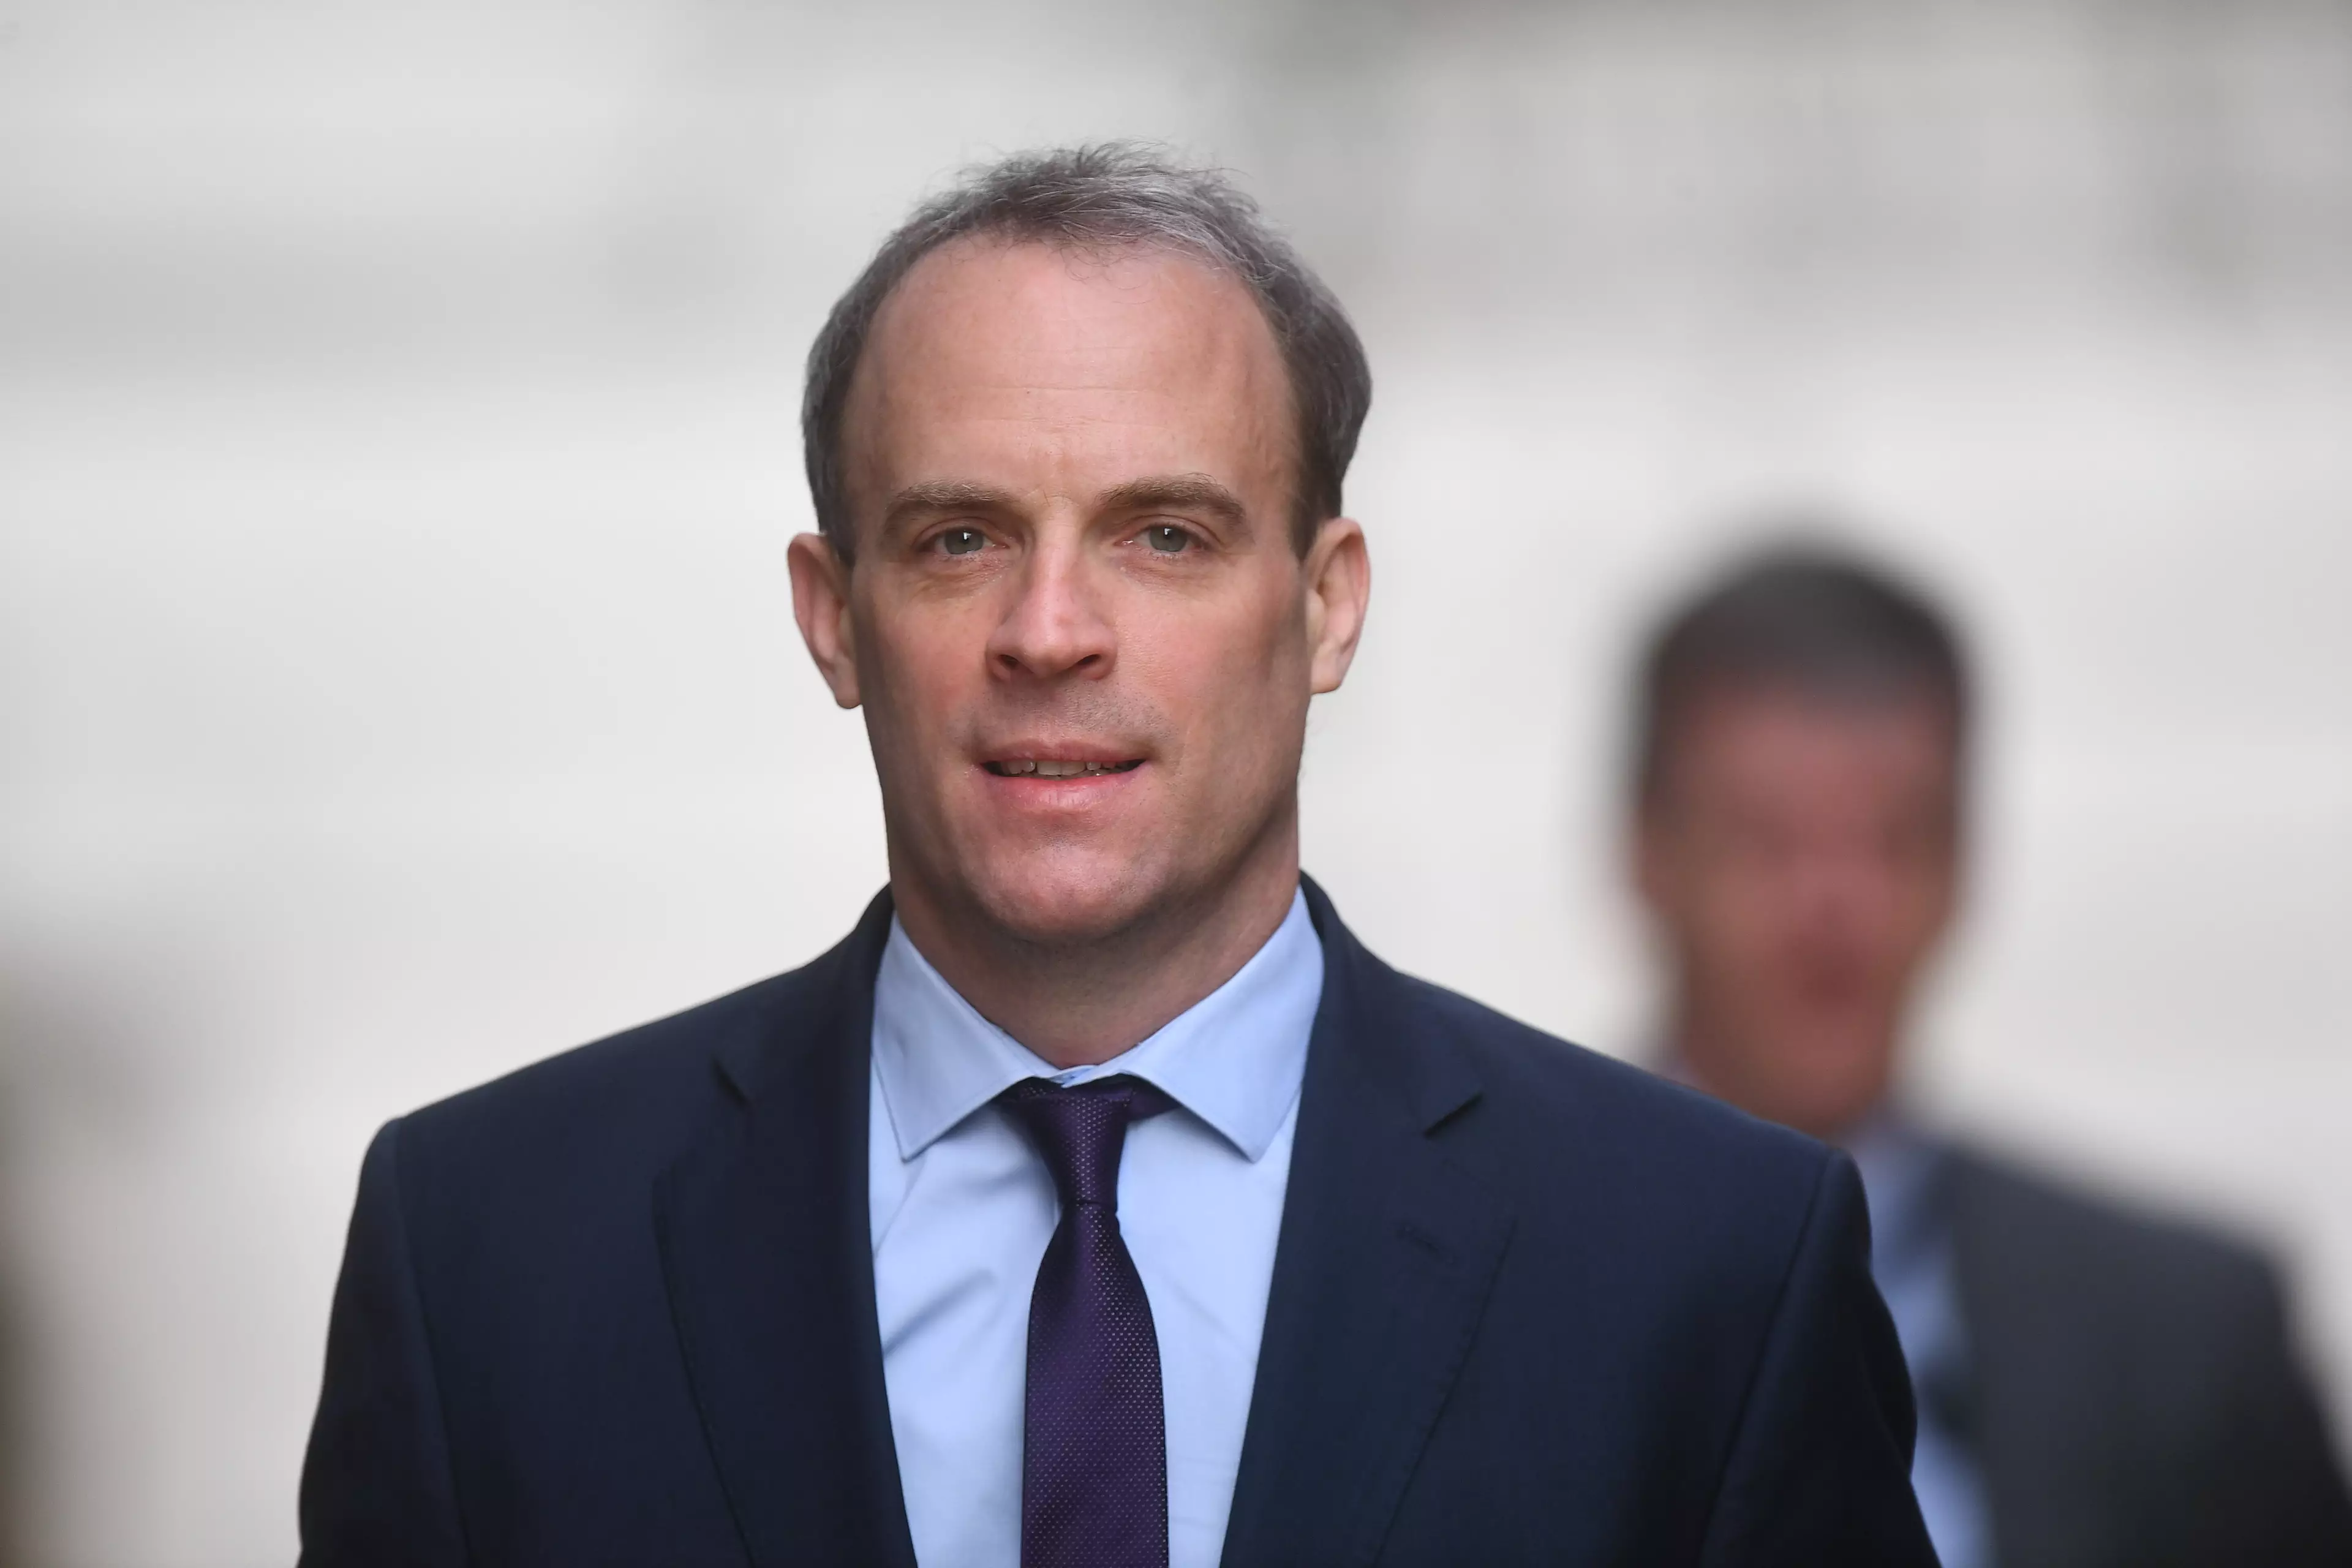 Dominic Raab has been deputising in the Prime Minister's absence.